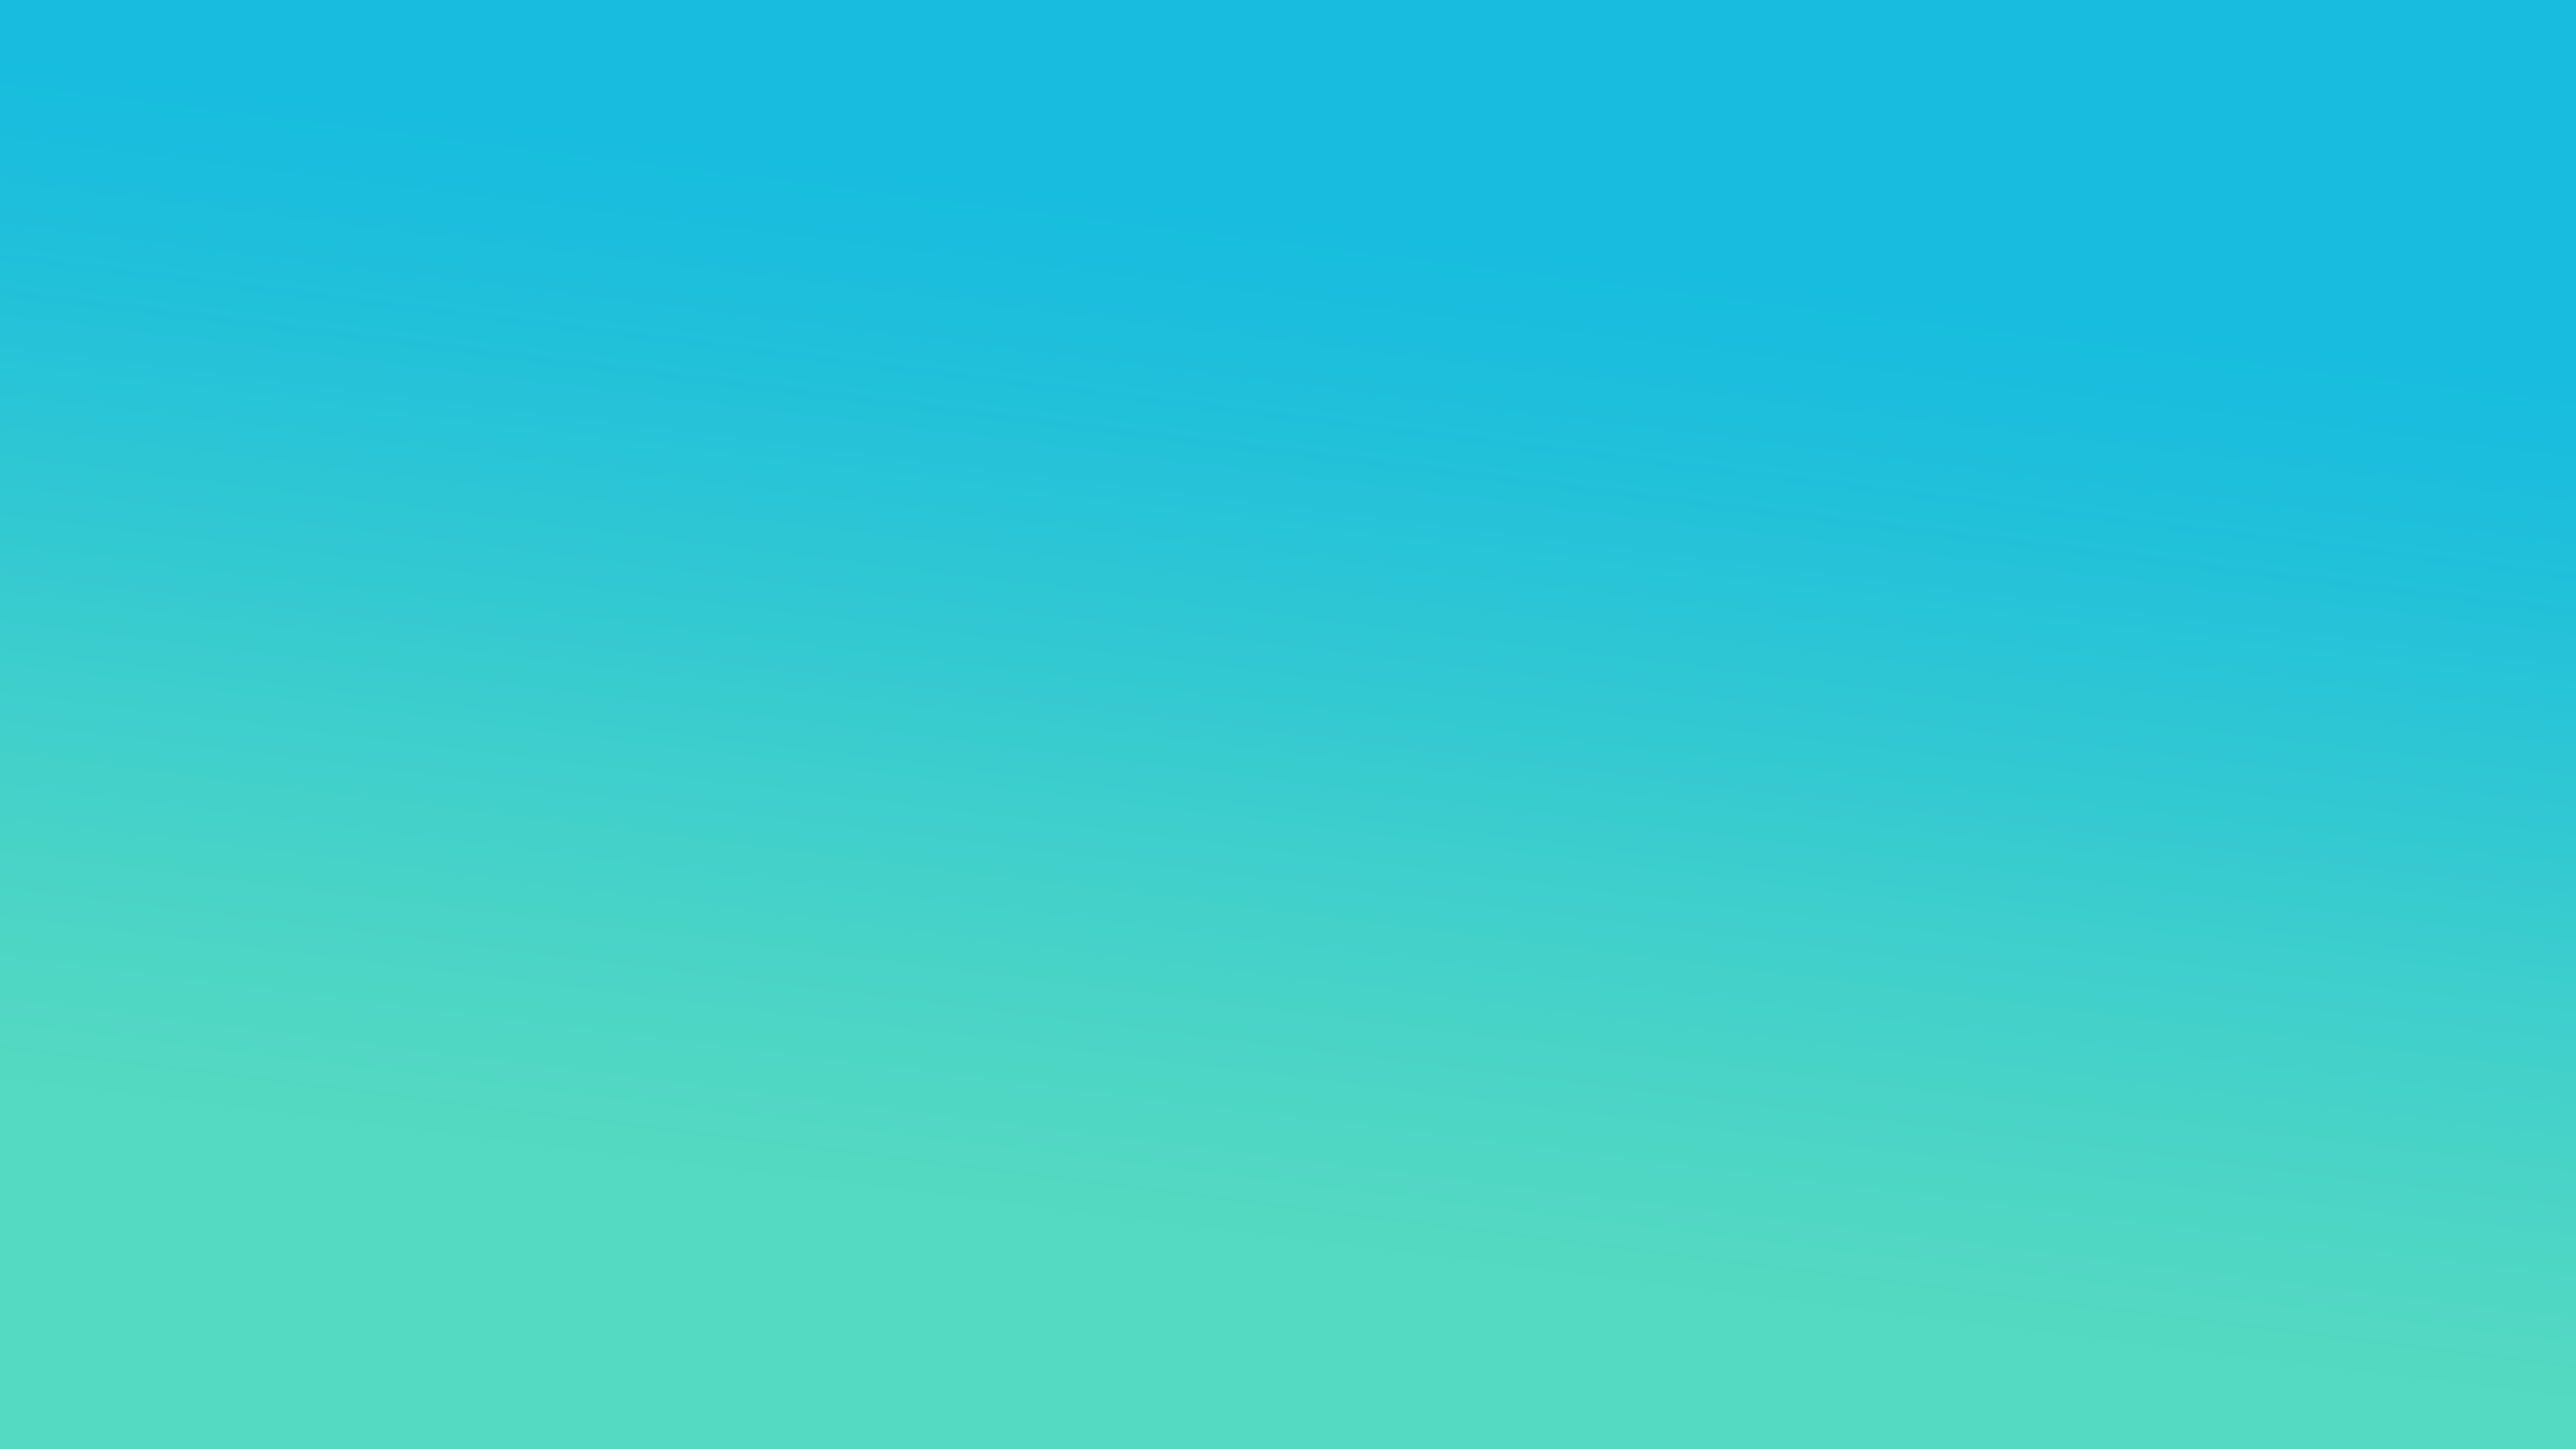 Soft Gradient Solid Color Gradient Cyan Cyan Background Turquoise 3840x2160